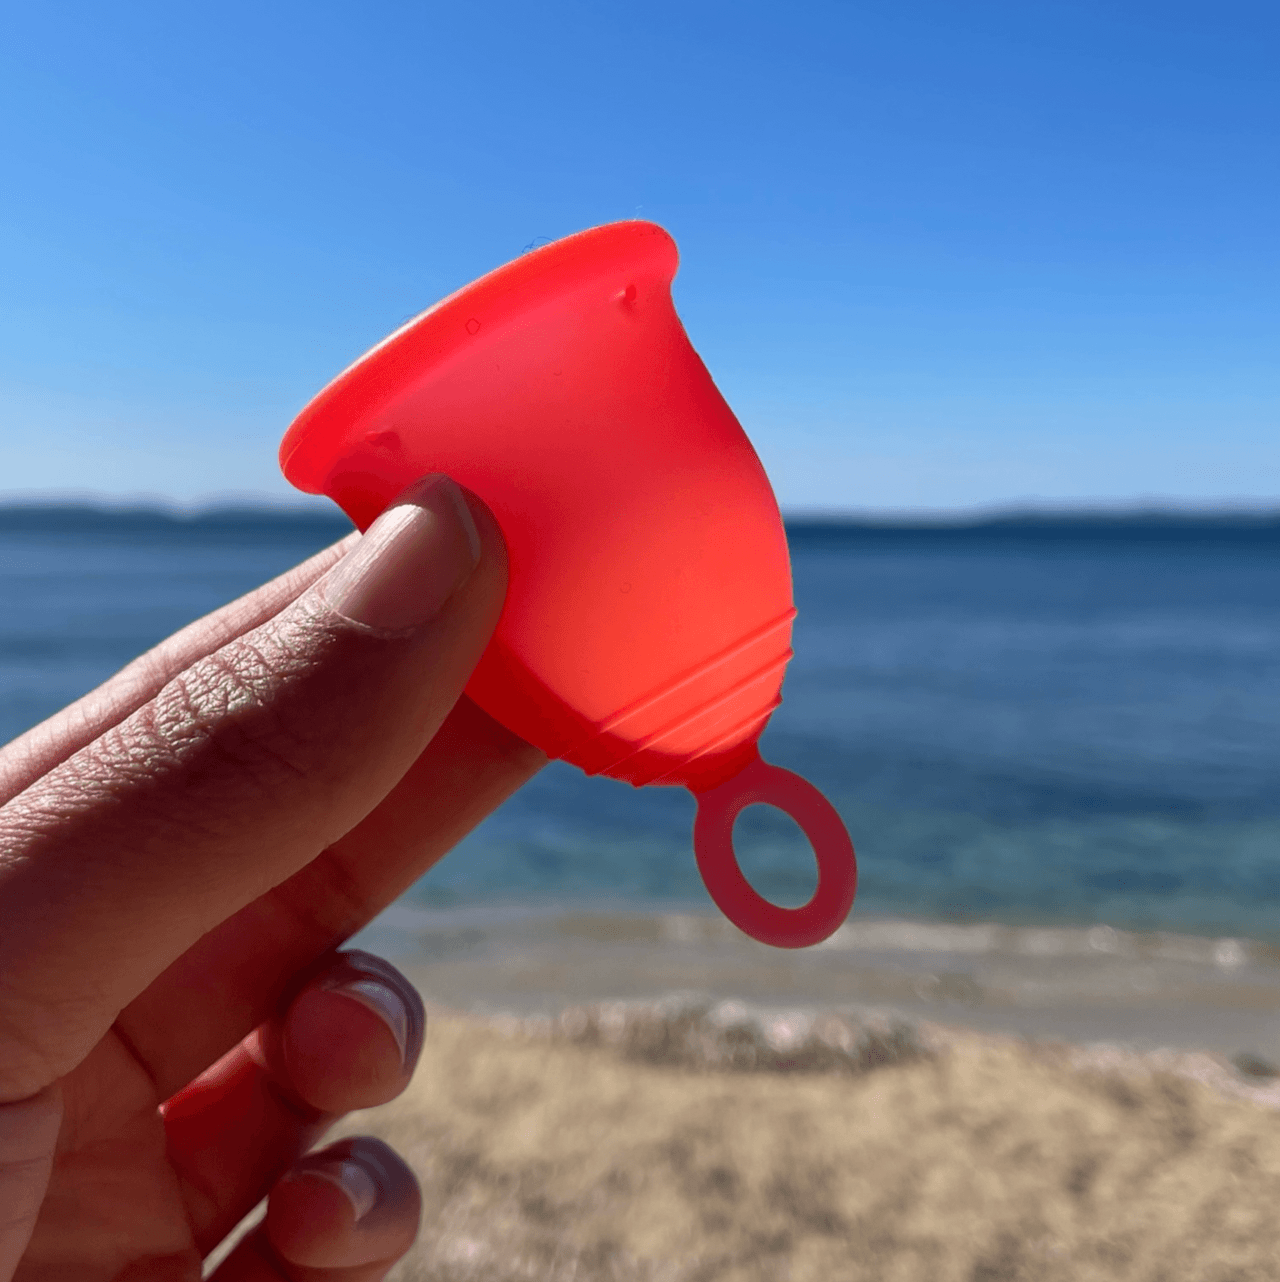 How to choose menstrual cup size? An expert shares tips